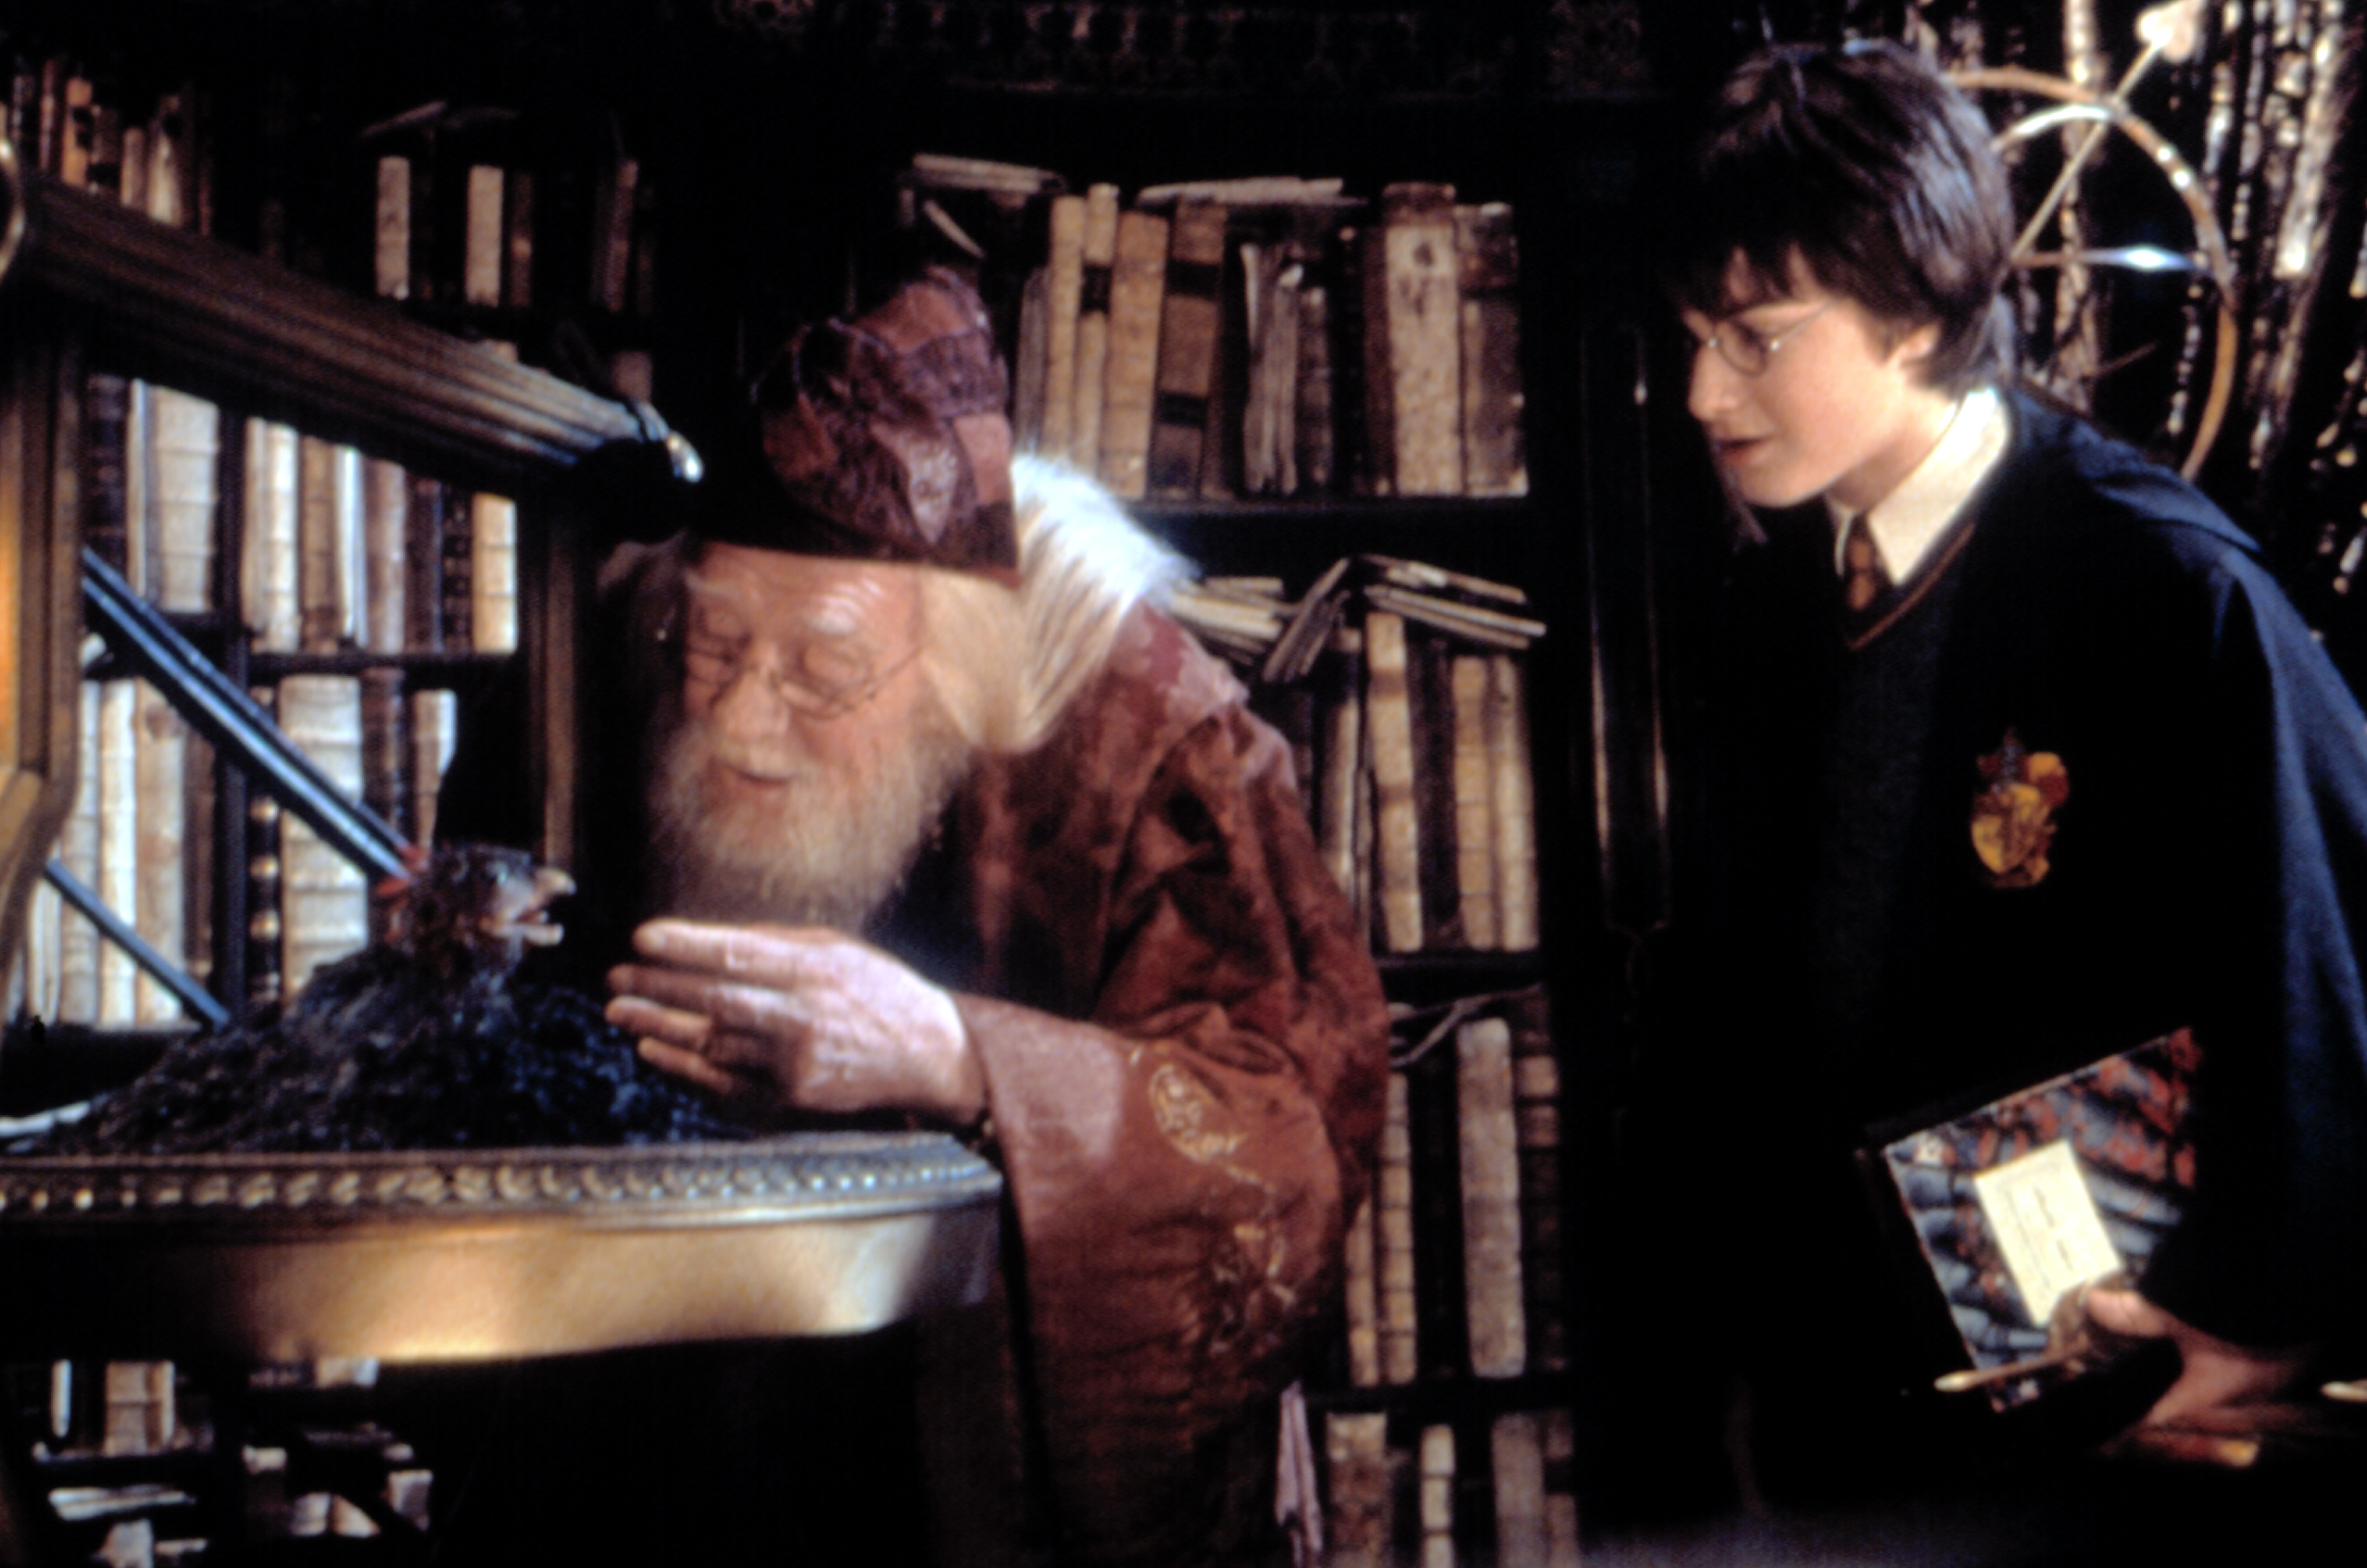 Dumbledore and Harry Potter stand by a phoenix; Dumbledore touches the bird, while Harry watches